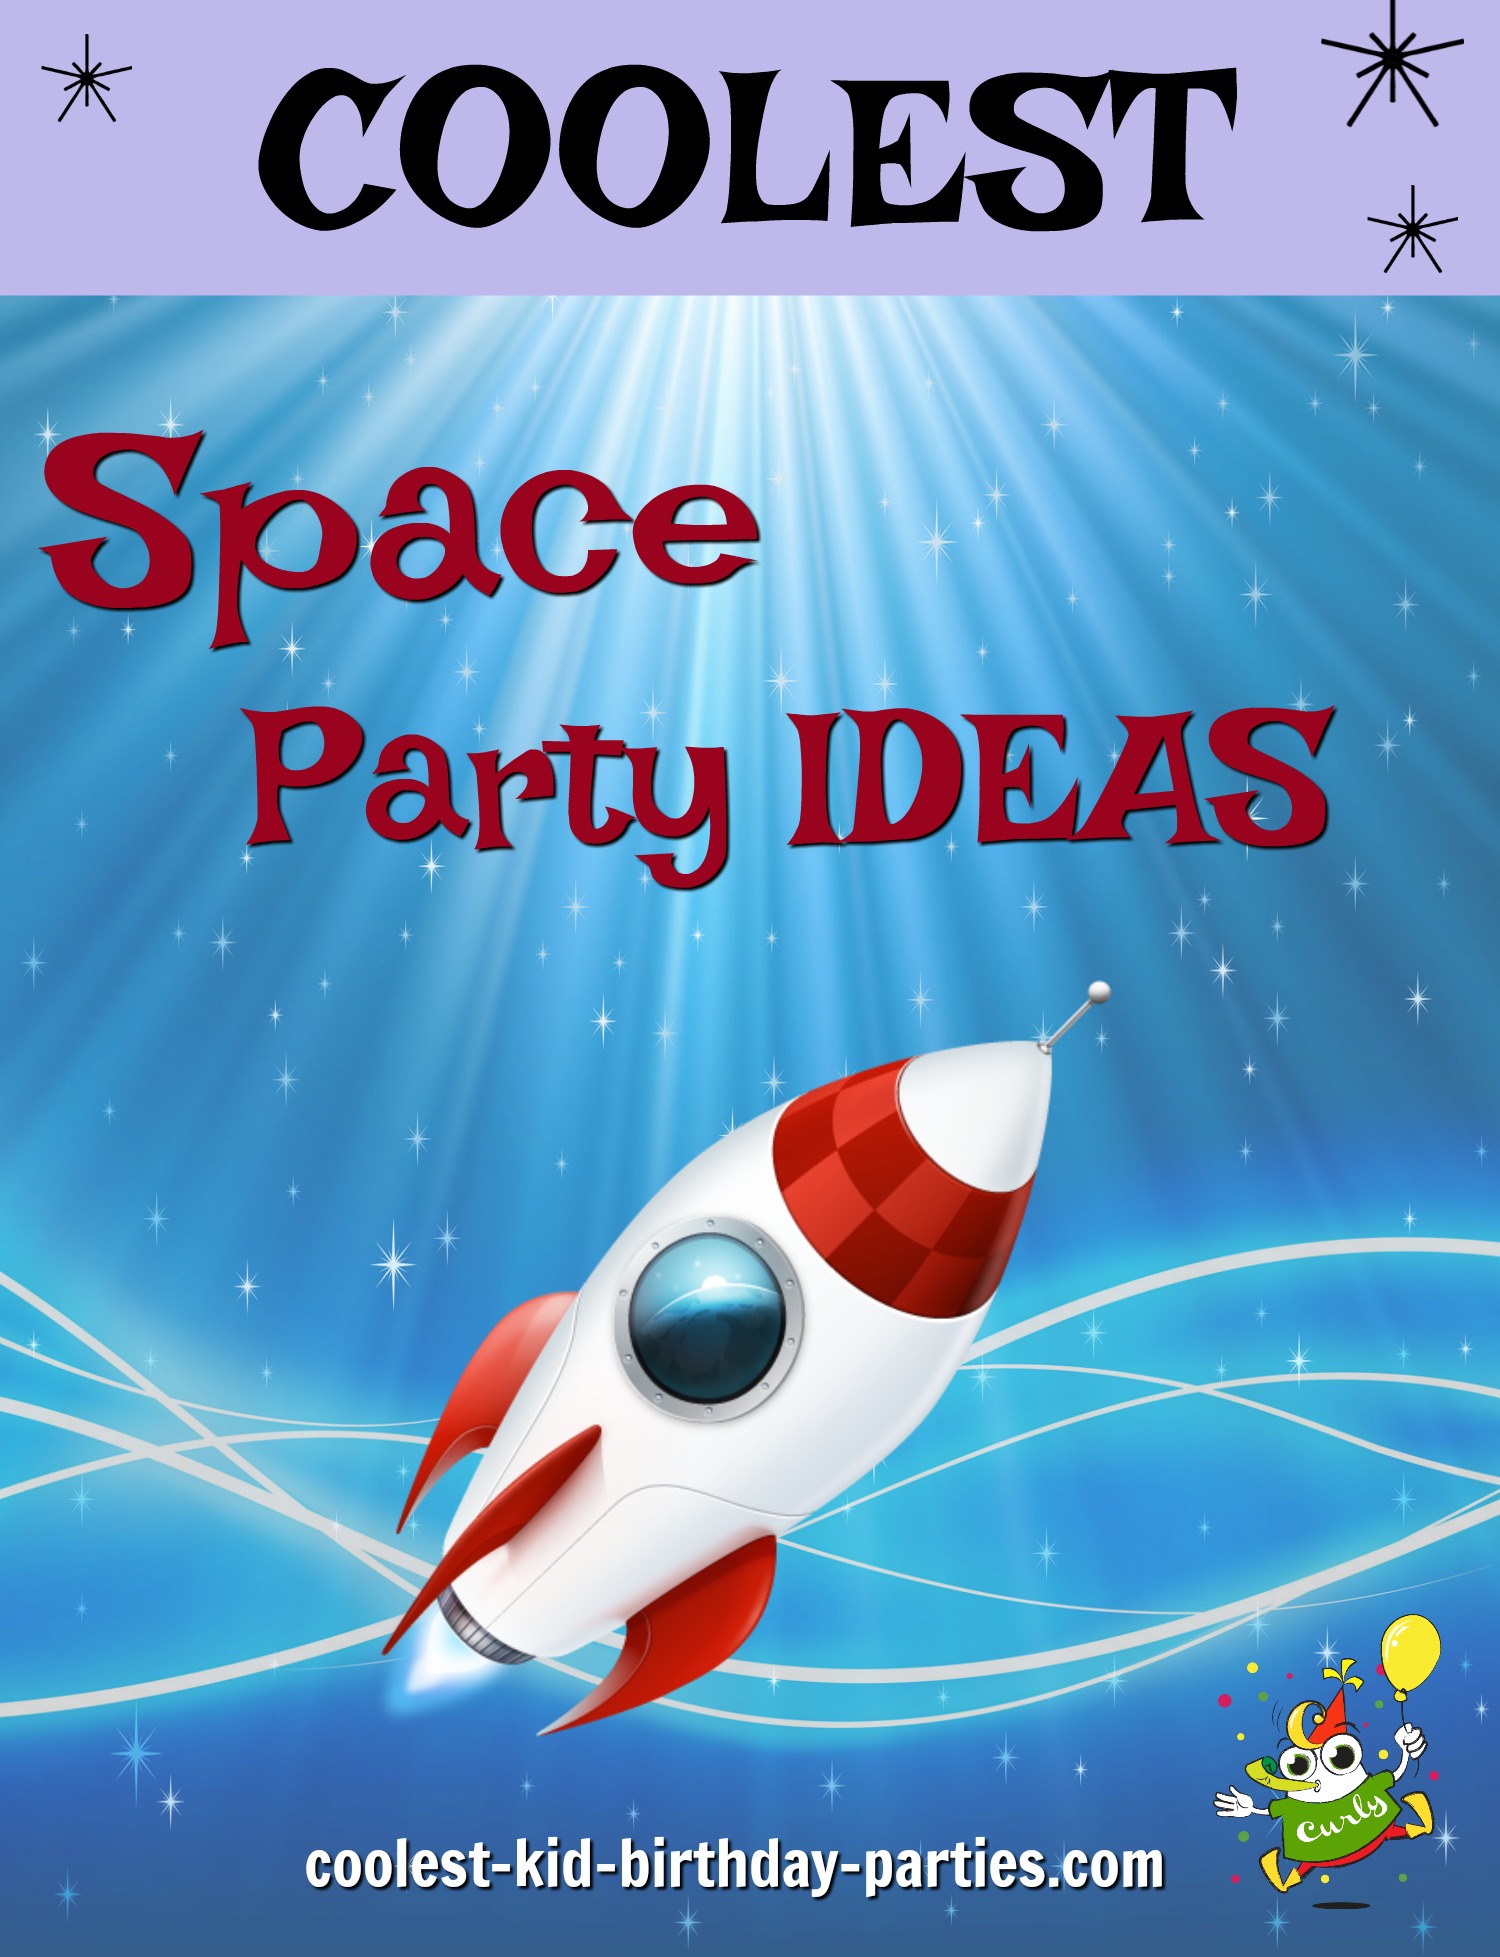 Space Party Ideas